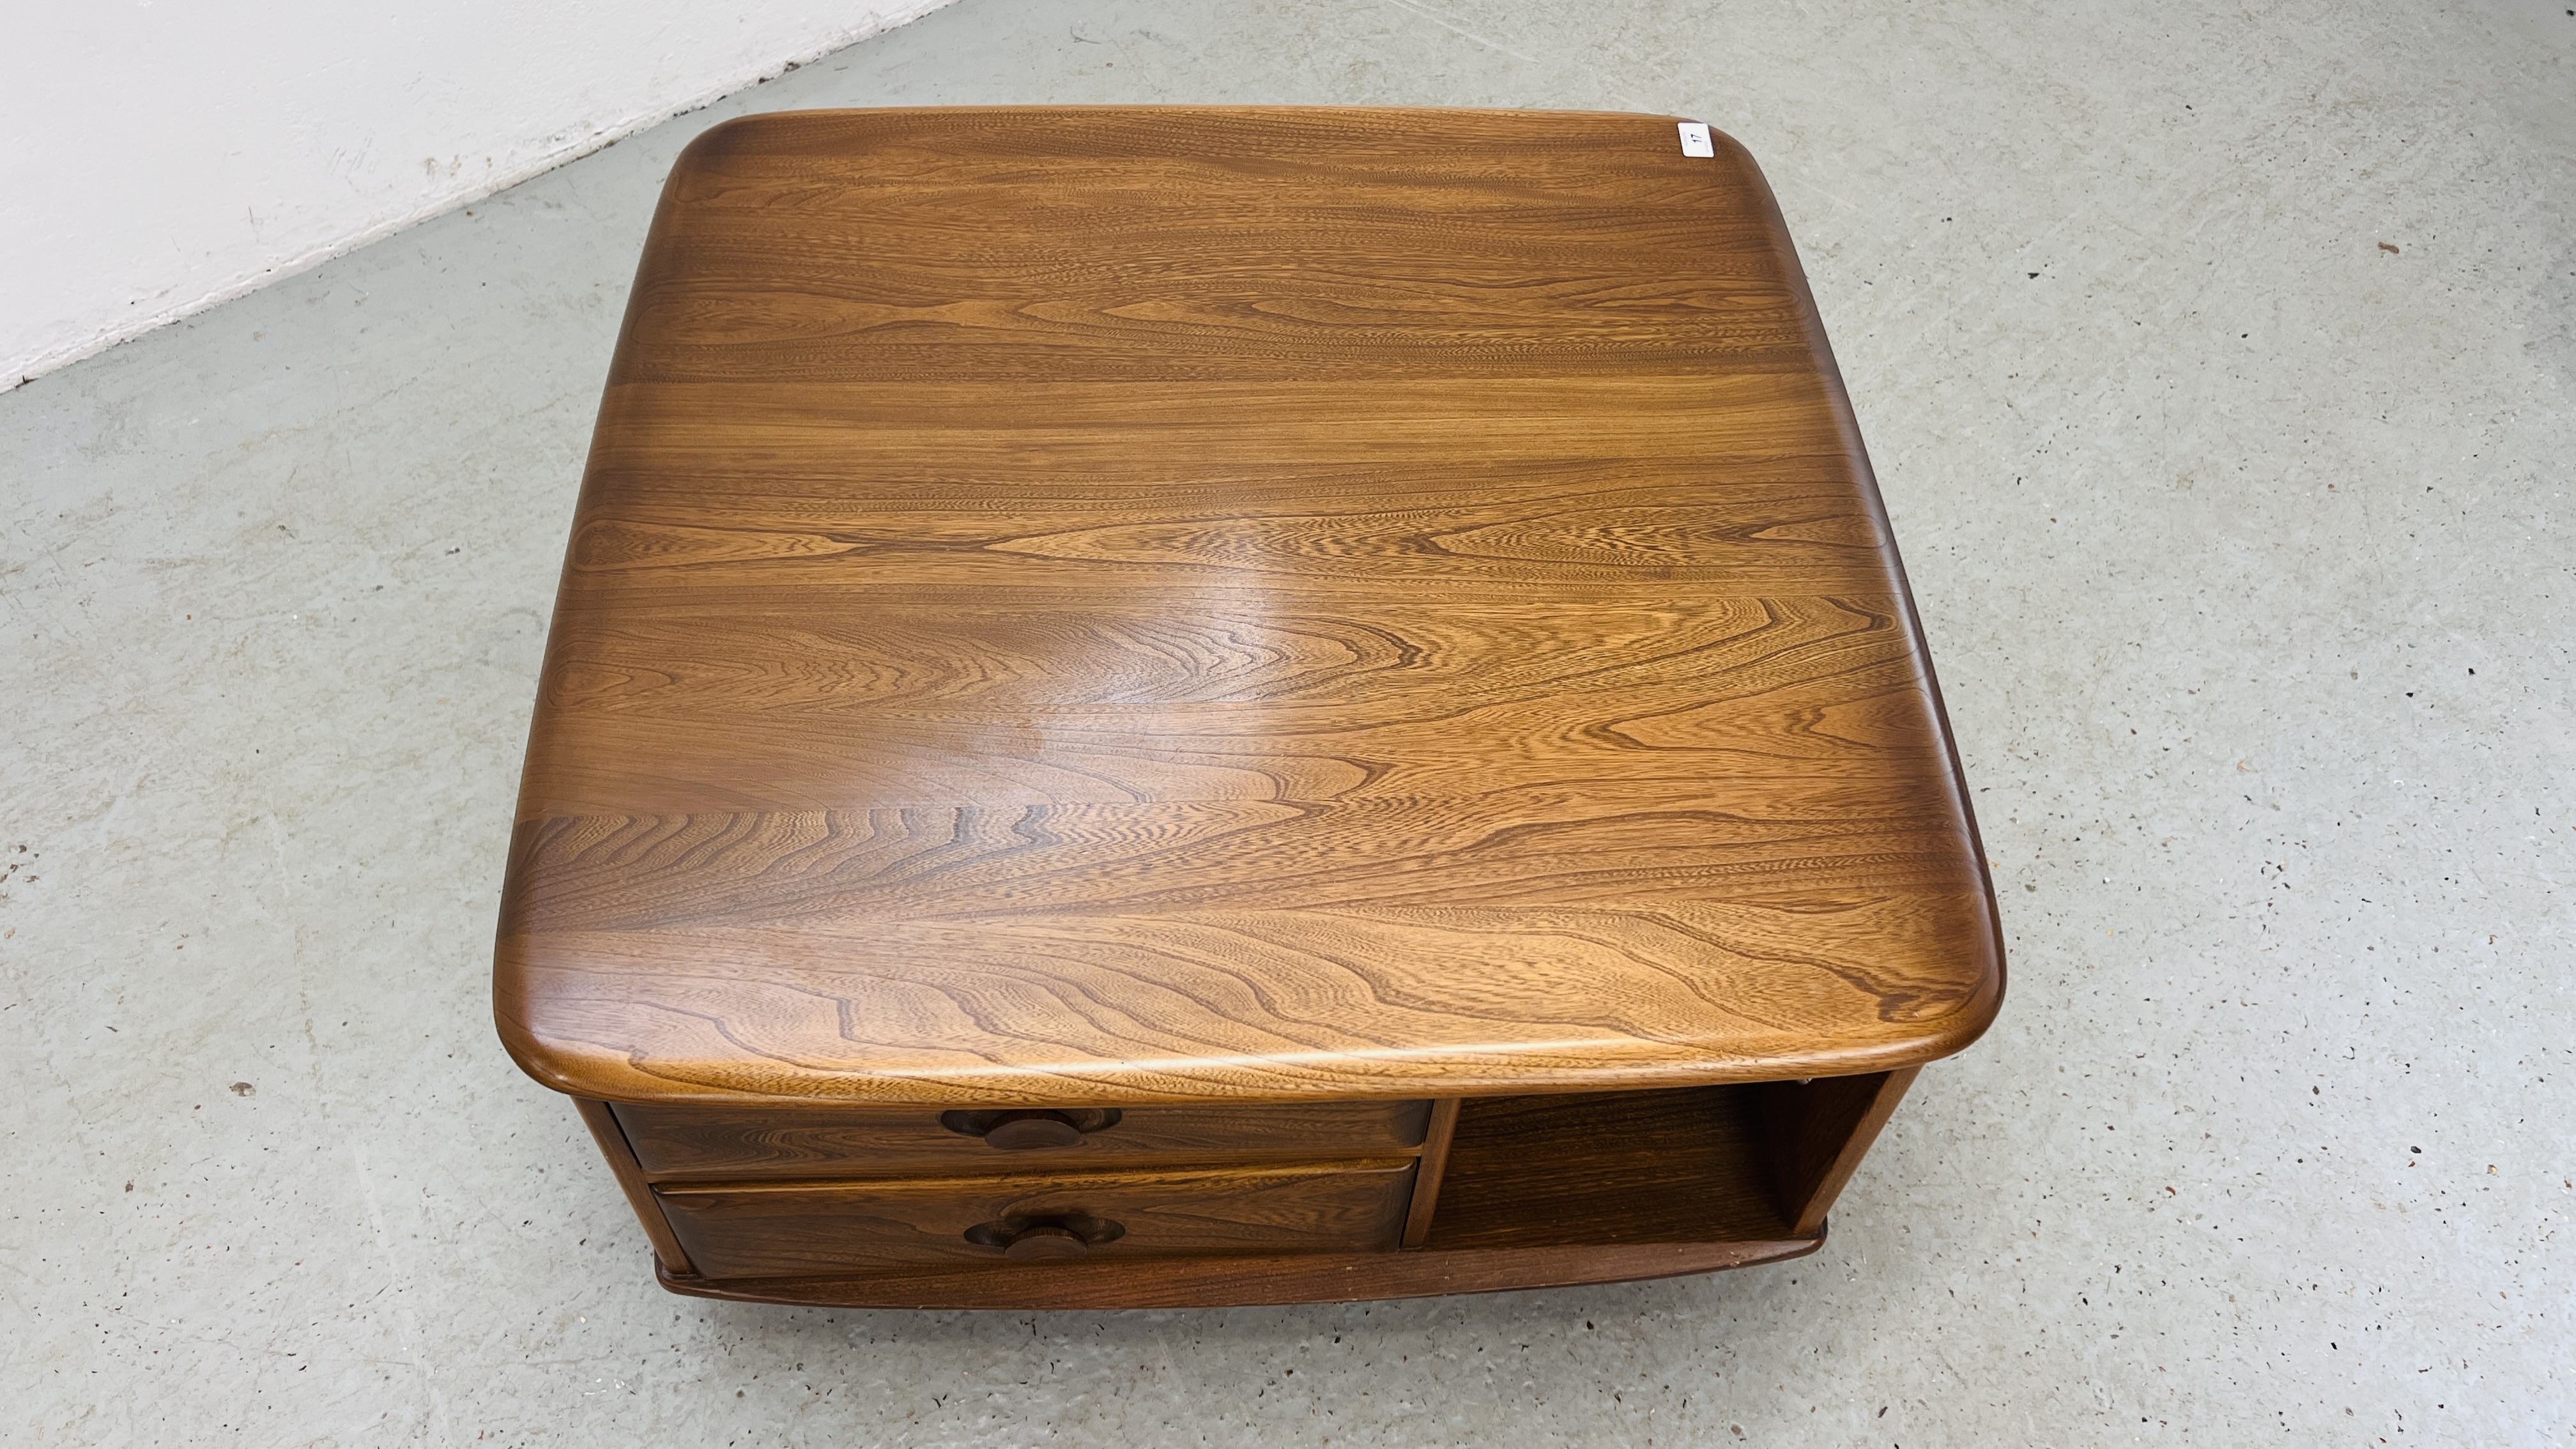 MID CENTURY ERCOL GOLDEN DAWN PANDORAS BOX COFFEE TABLE WITH TWO DRAWERS W 80CM, D 80CM, H 40CM. - Image 6 of 10